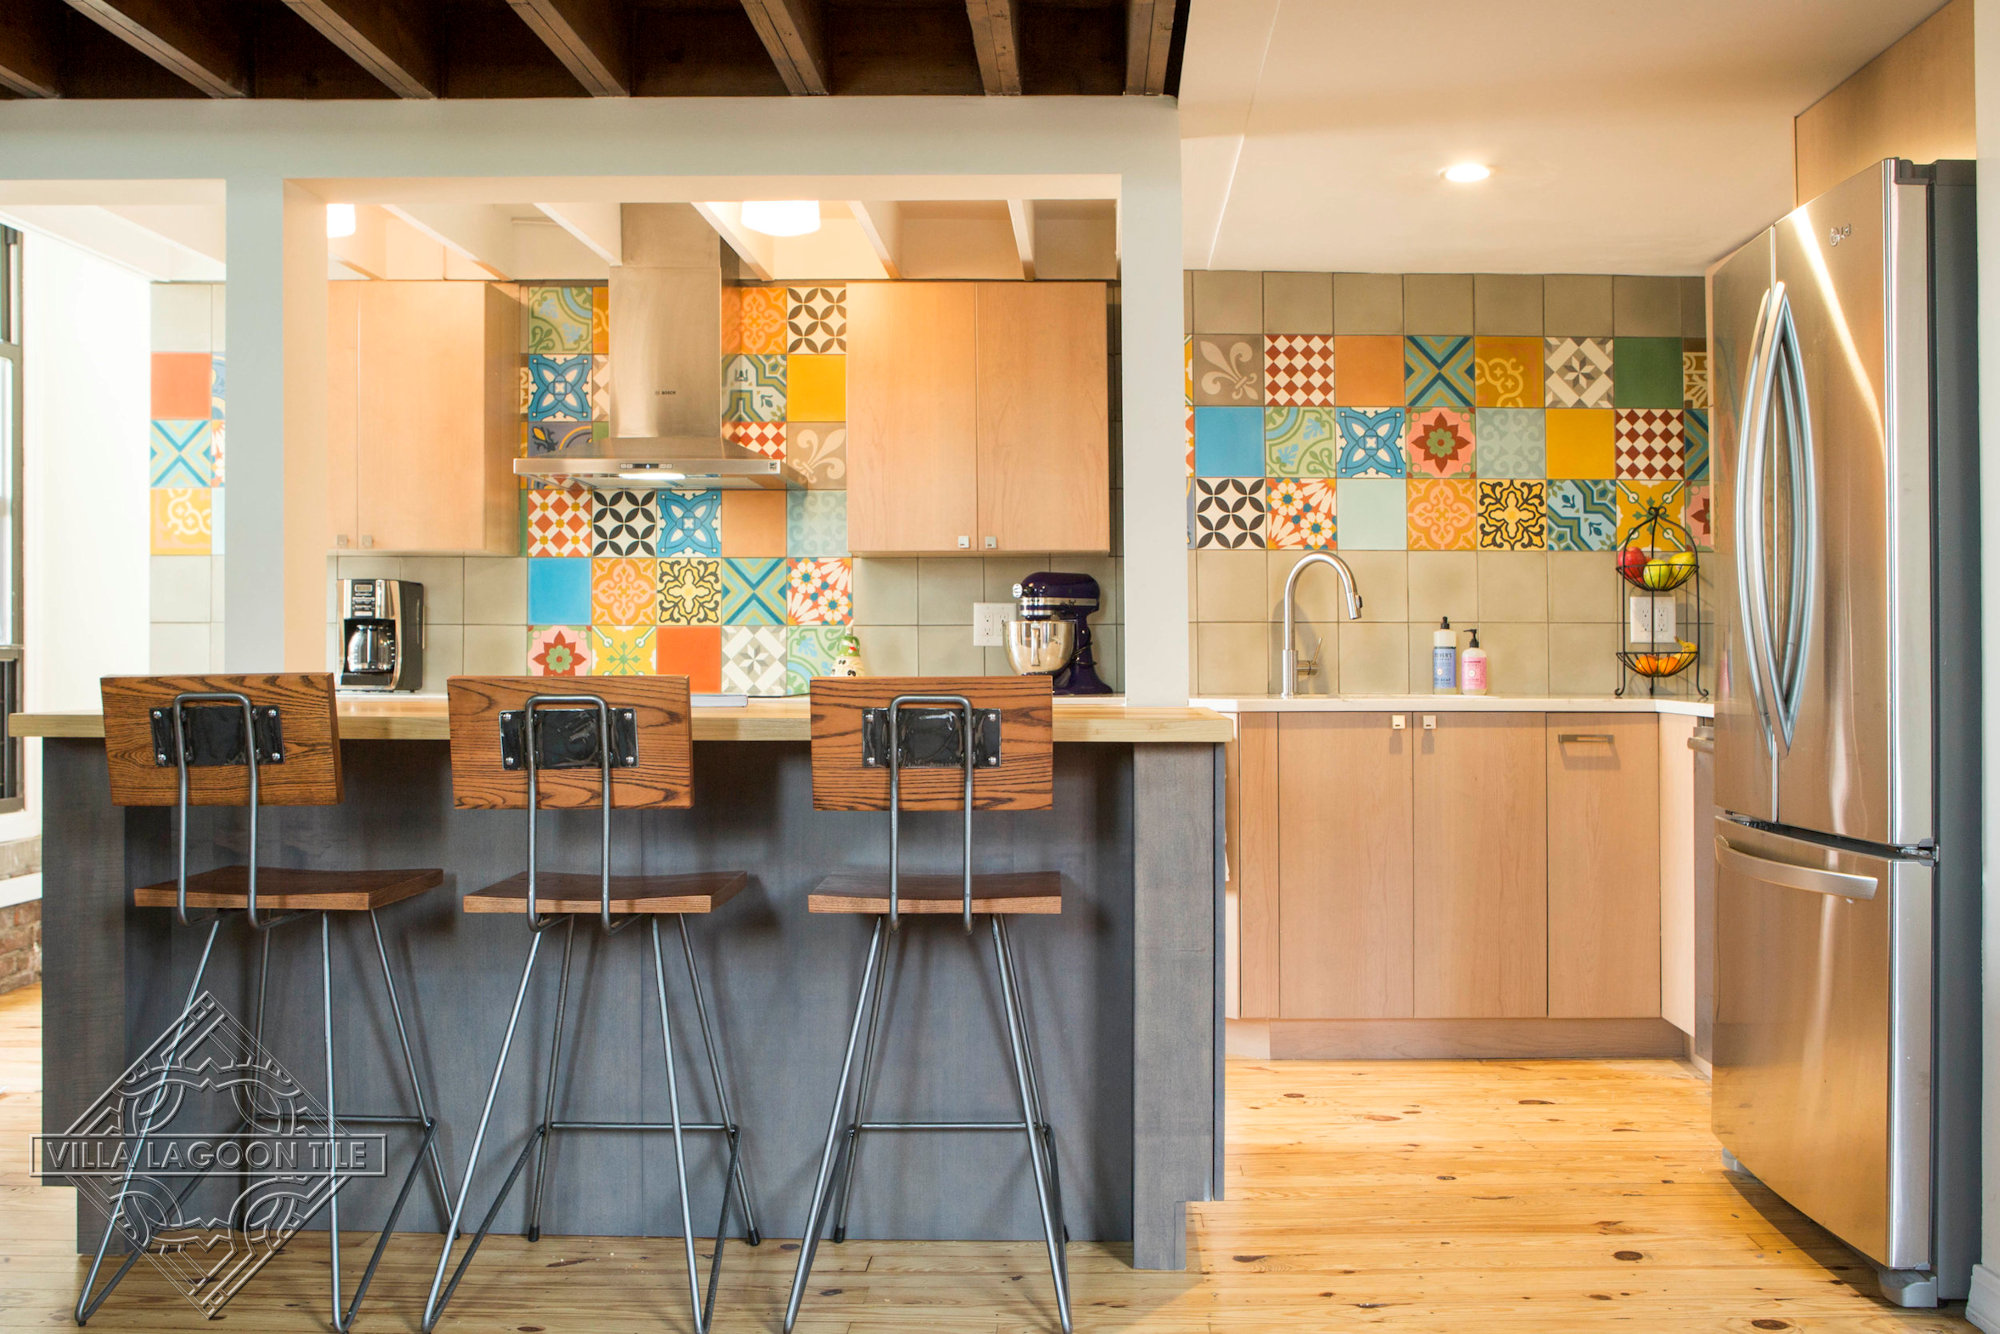 Small kitchen with colorful patchwork and solid cement tiles covering the wall.